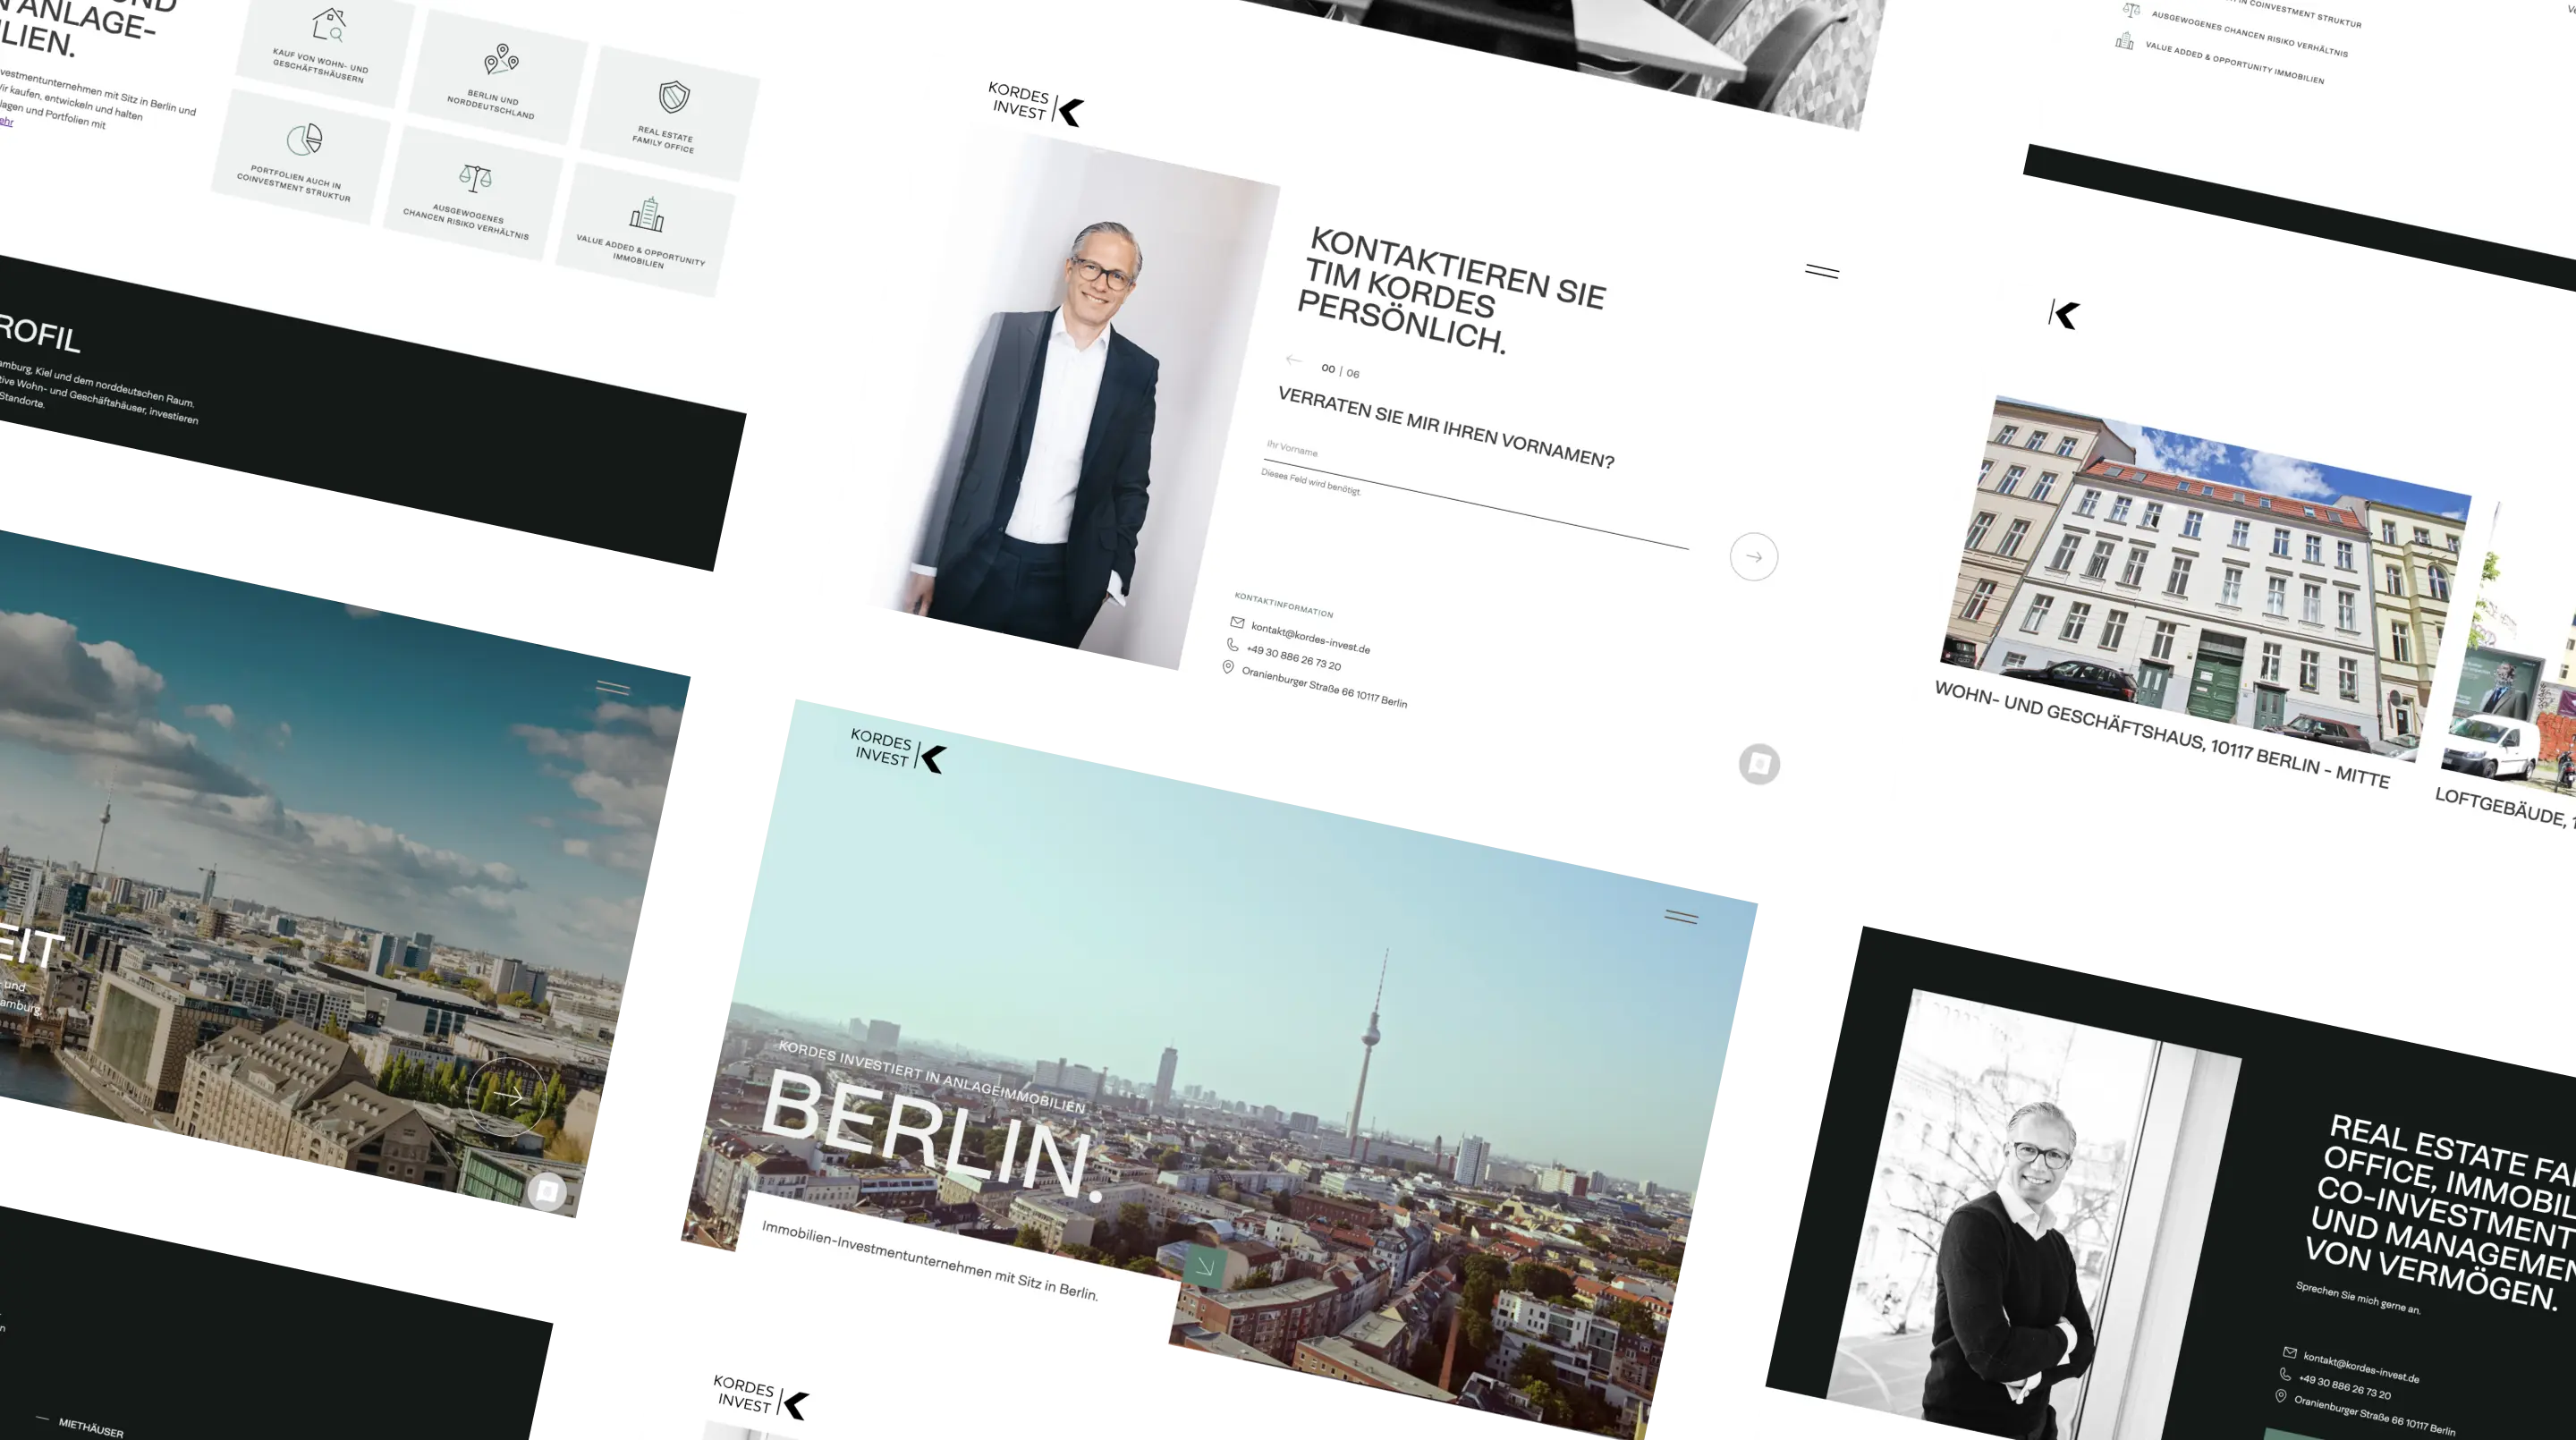 Kordes is a real estate investment company based in Berlin